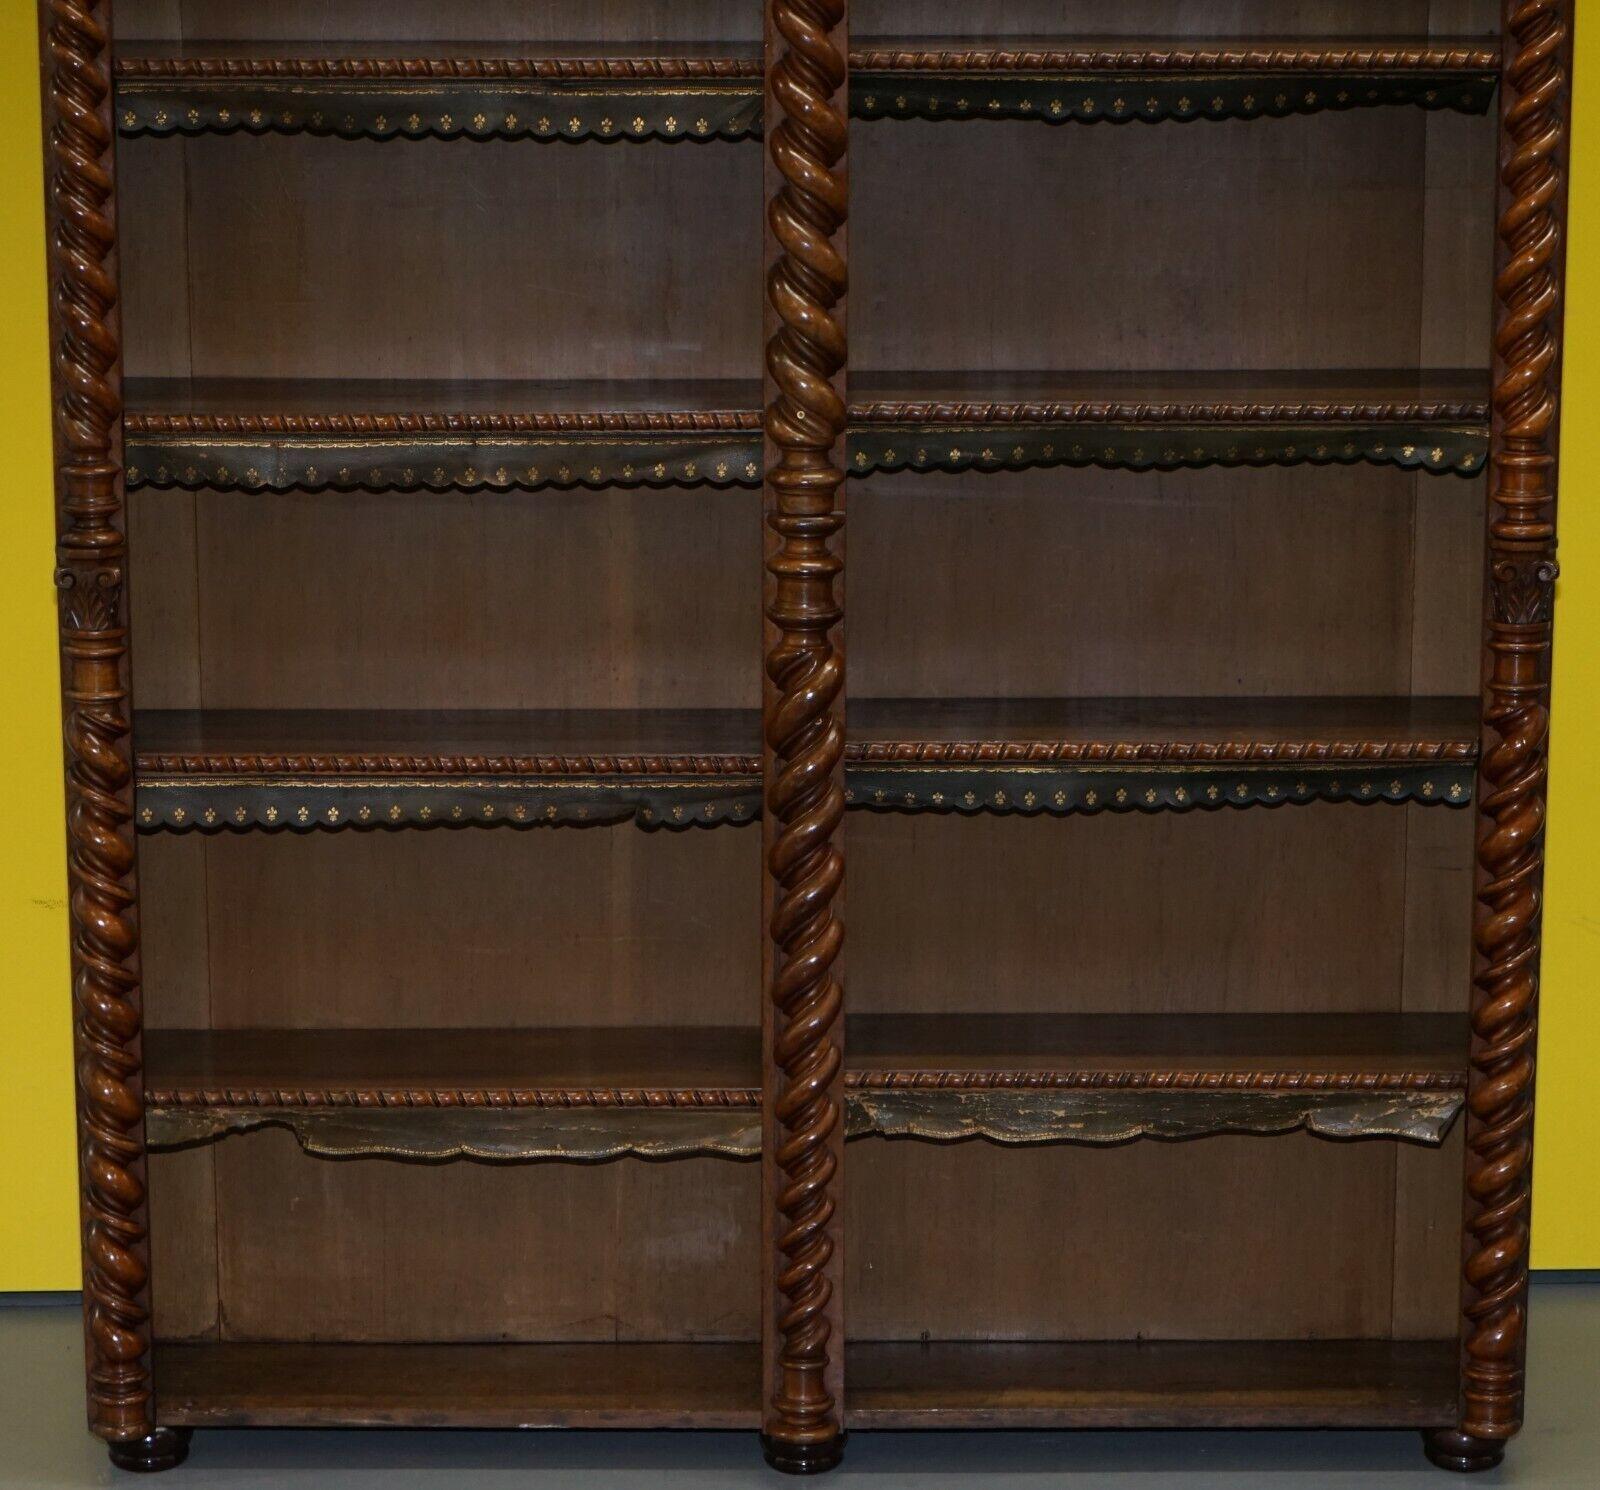 Hand-Crafted Rare Regency Library Bookcase with Hidden Build in Coat Cupboards Leather Trim